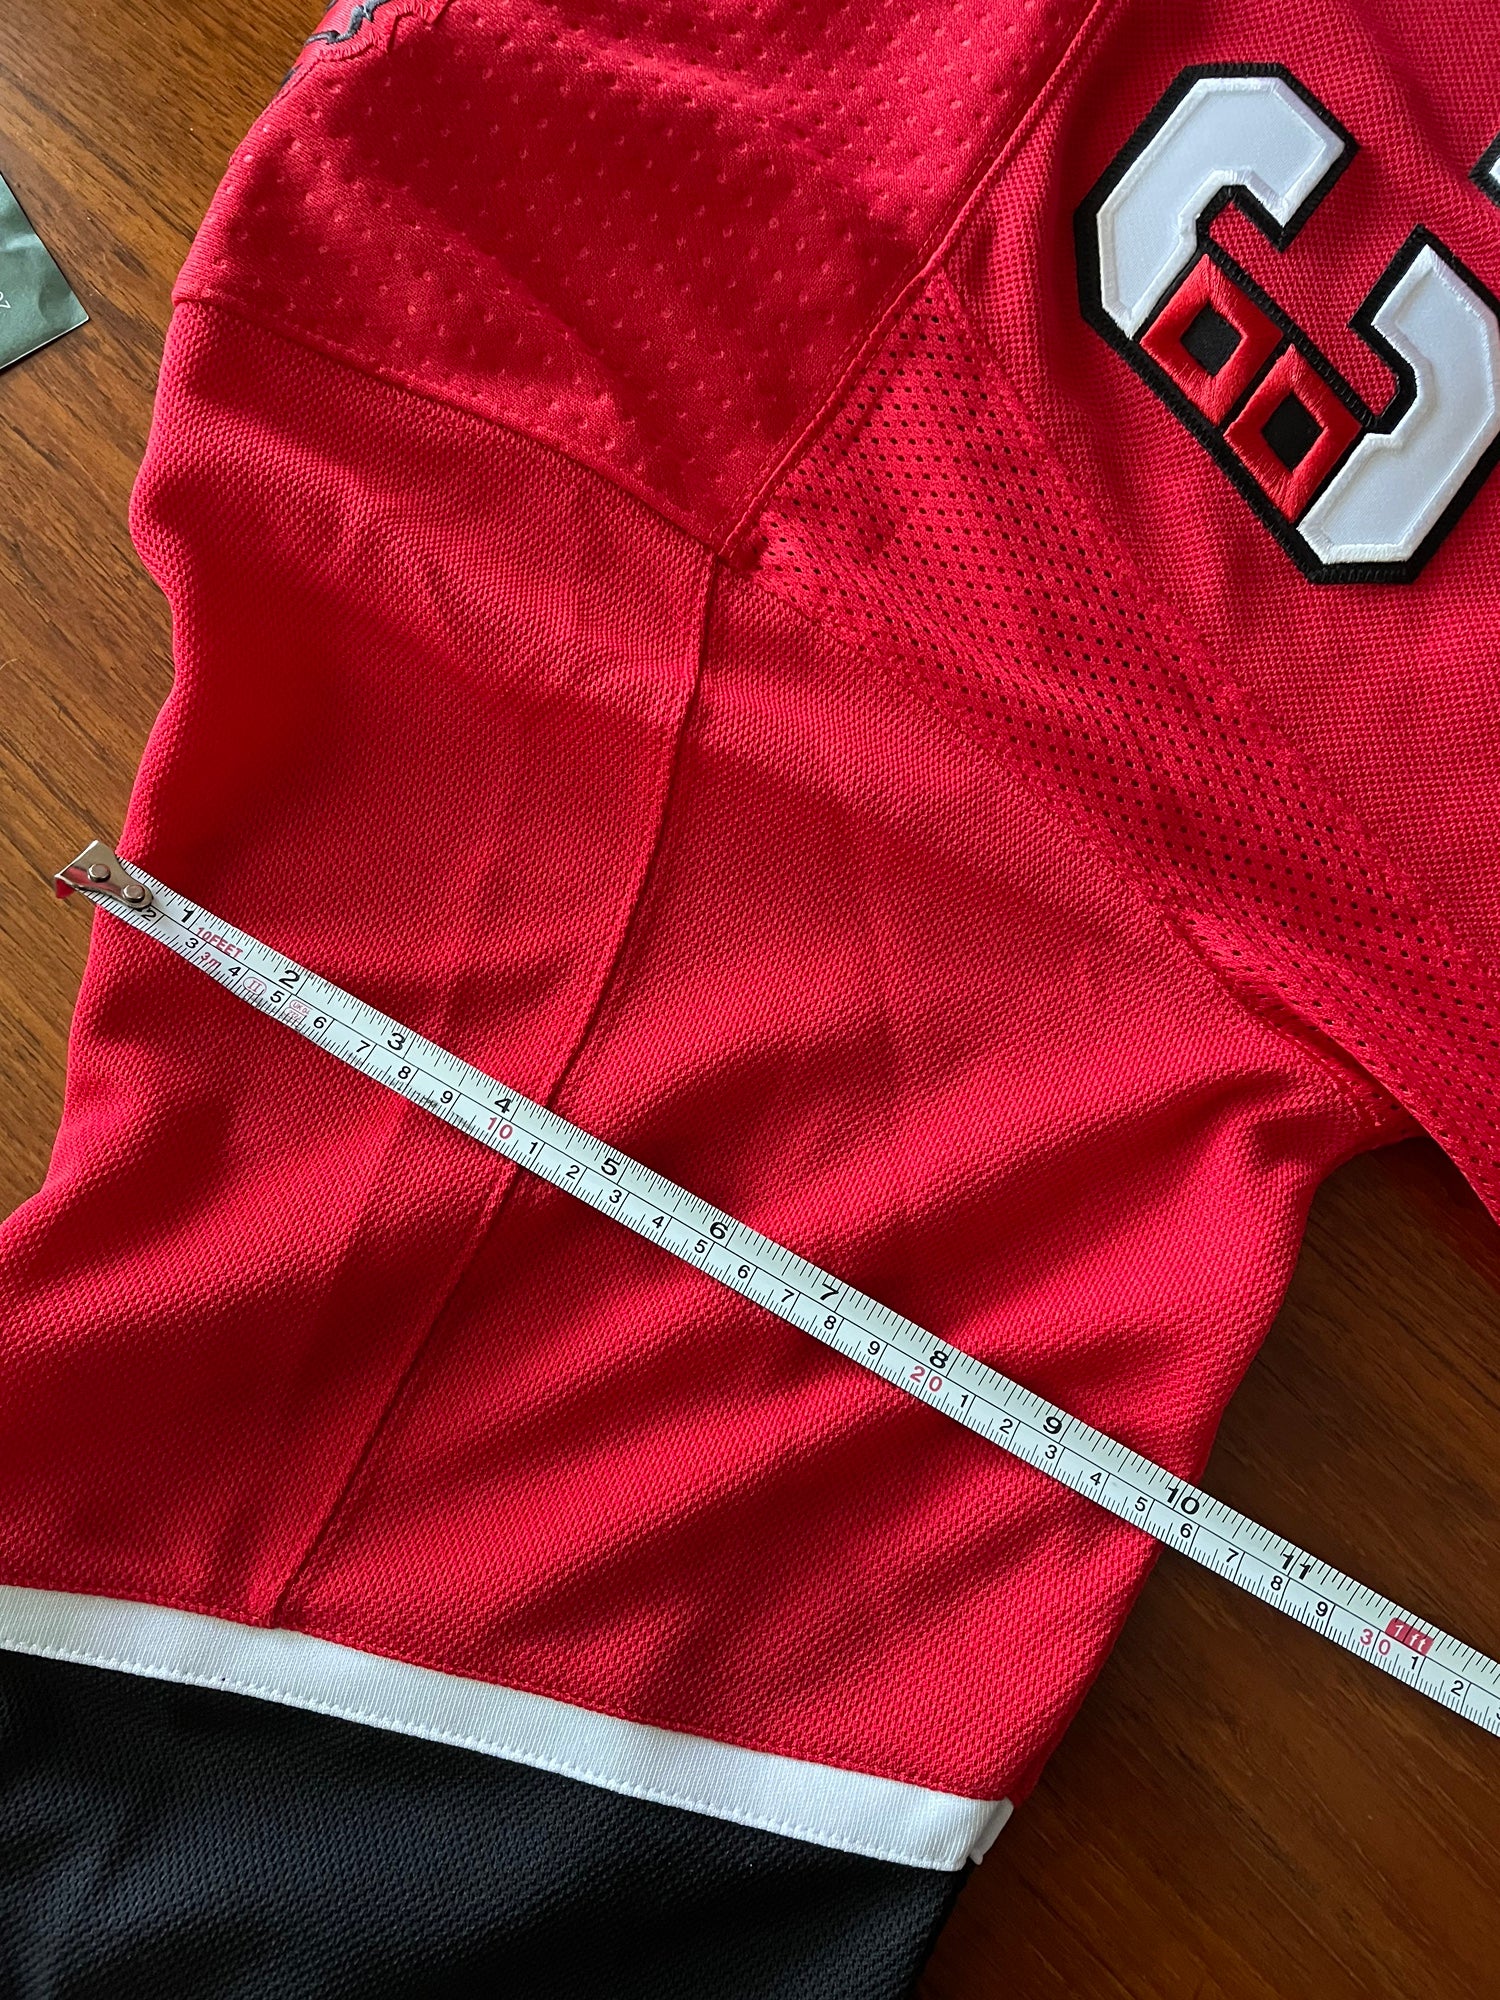 Carolina Hurricanes reverse retro for sale! Brand new size 52. $235 CAD  plus shipping or best offer. : r/hockeyjerseys